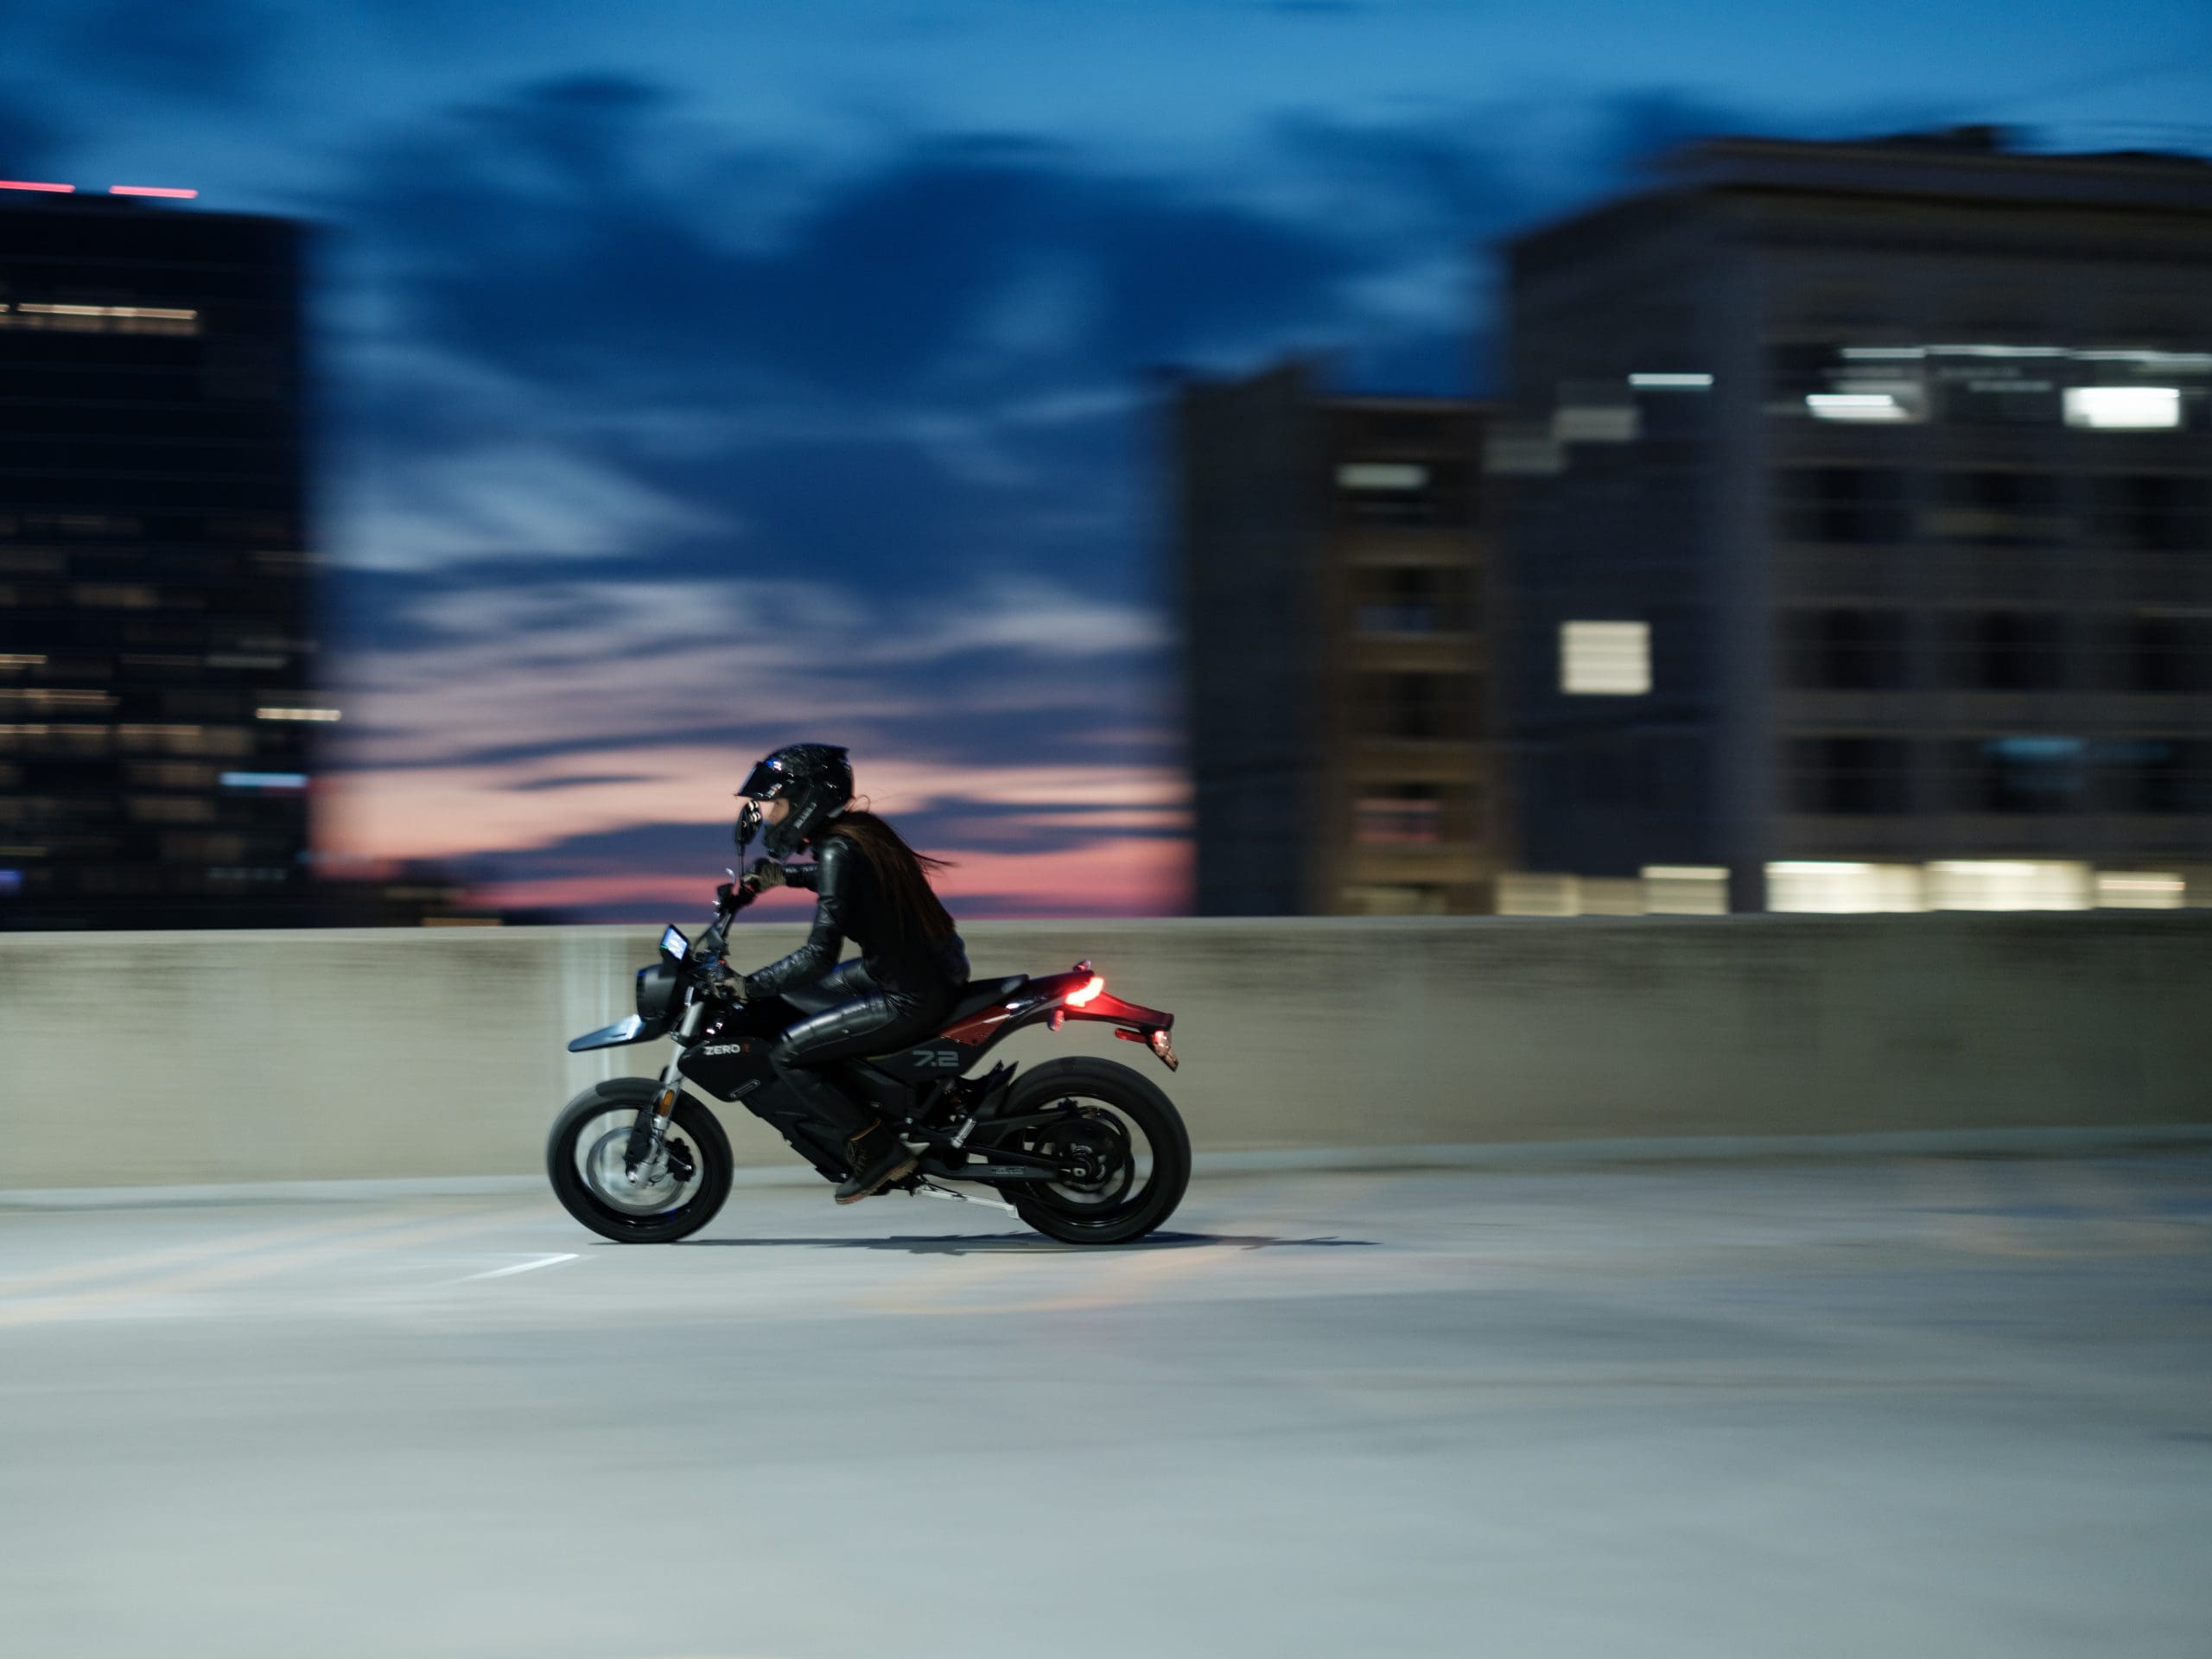 A view of a Zero motorcycle, currently celebrating a hefty discount! Media provided by Zero Motorcycles.